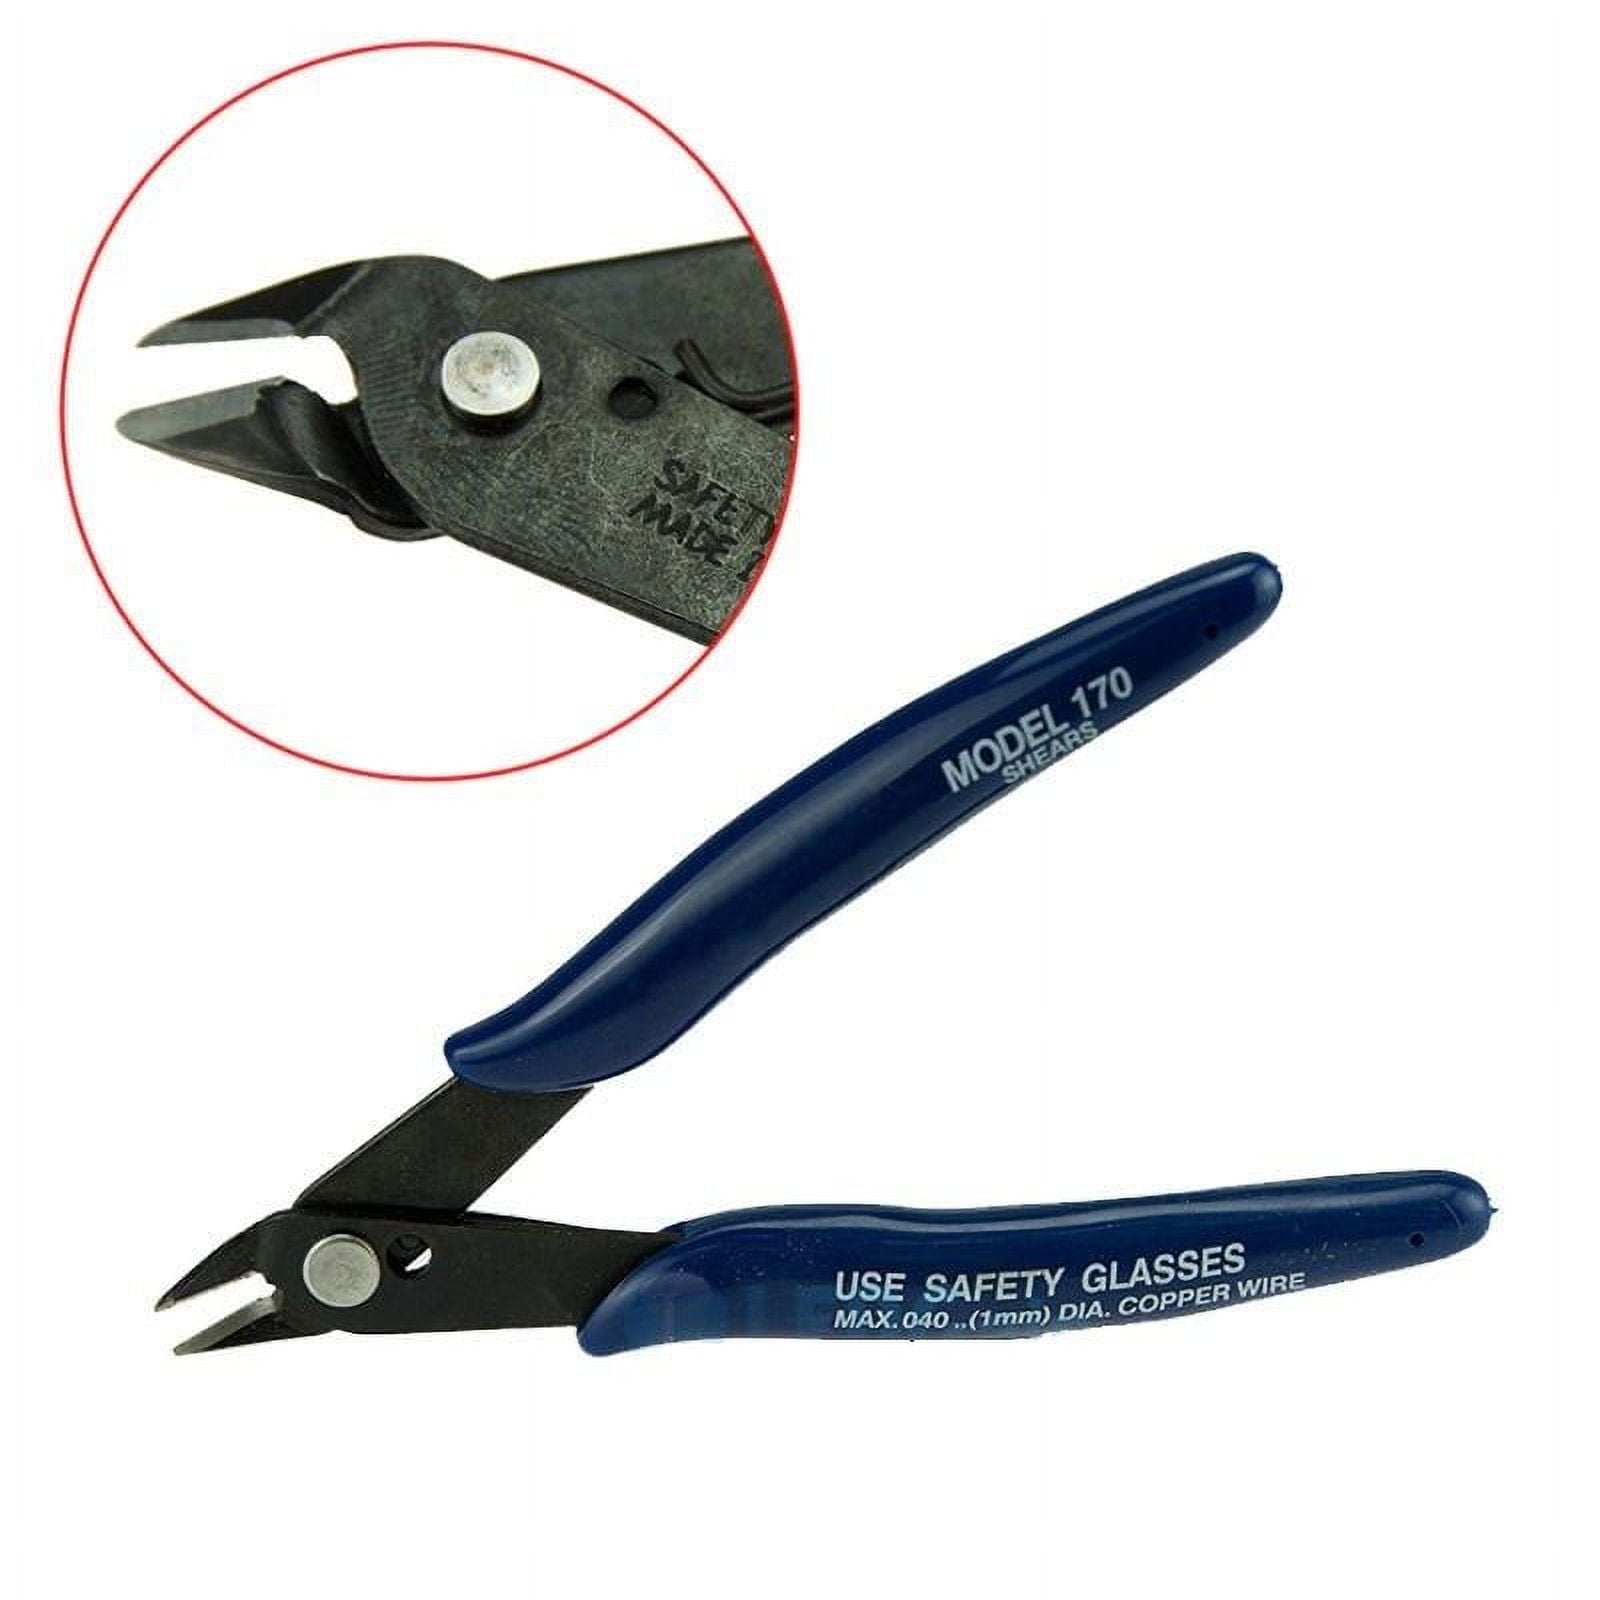 Cablevantage Electrical Cutting Plier Jewelry Wire Cable Cutter